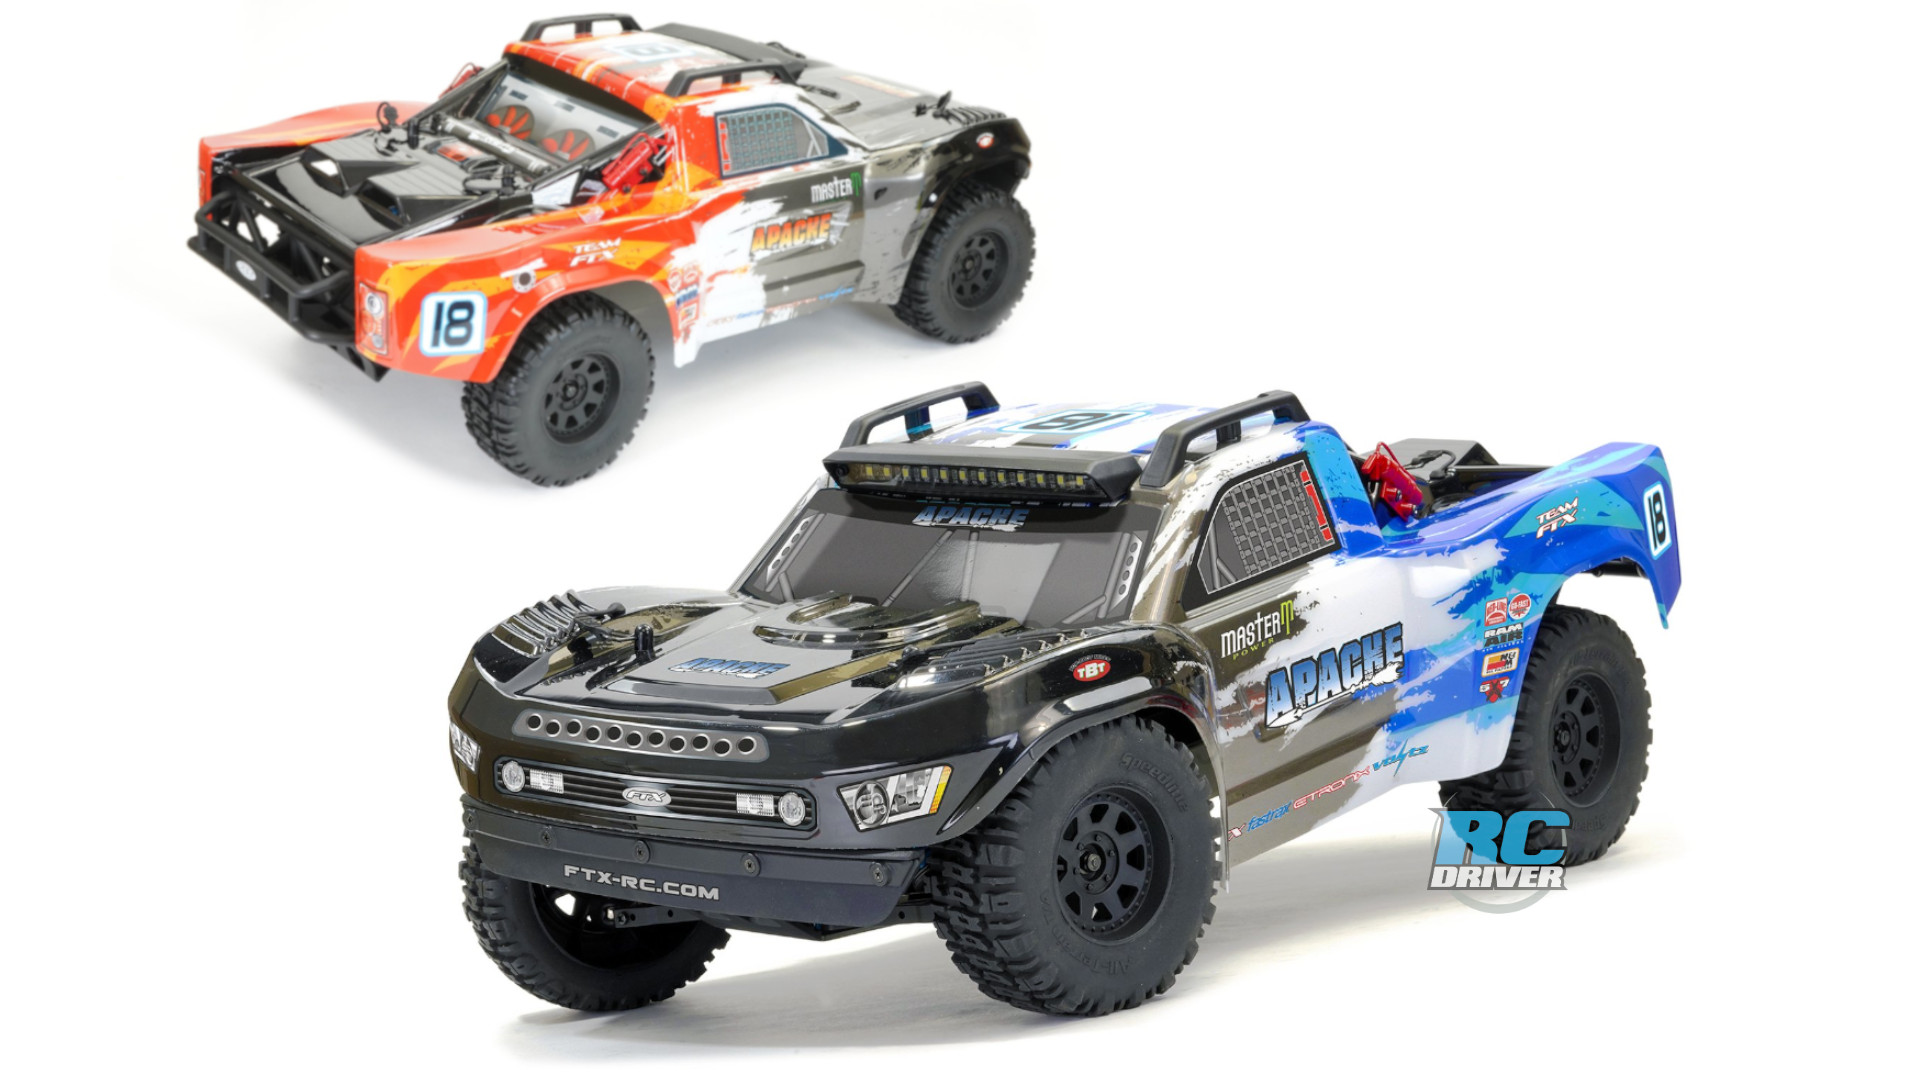 FTX Apache Brushless RTR Trophy Truck